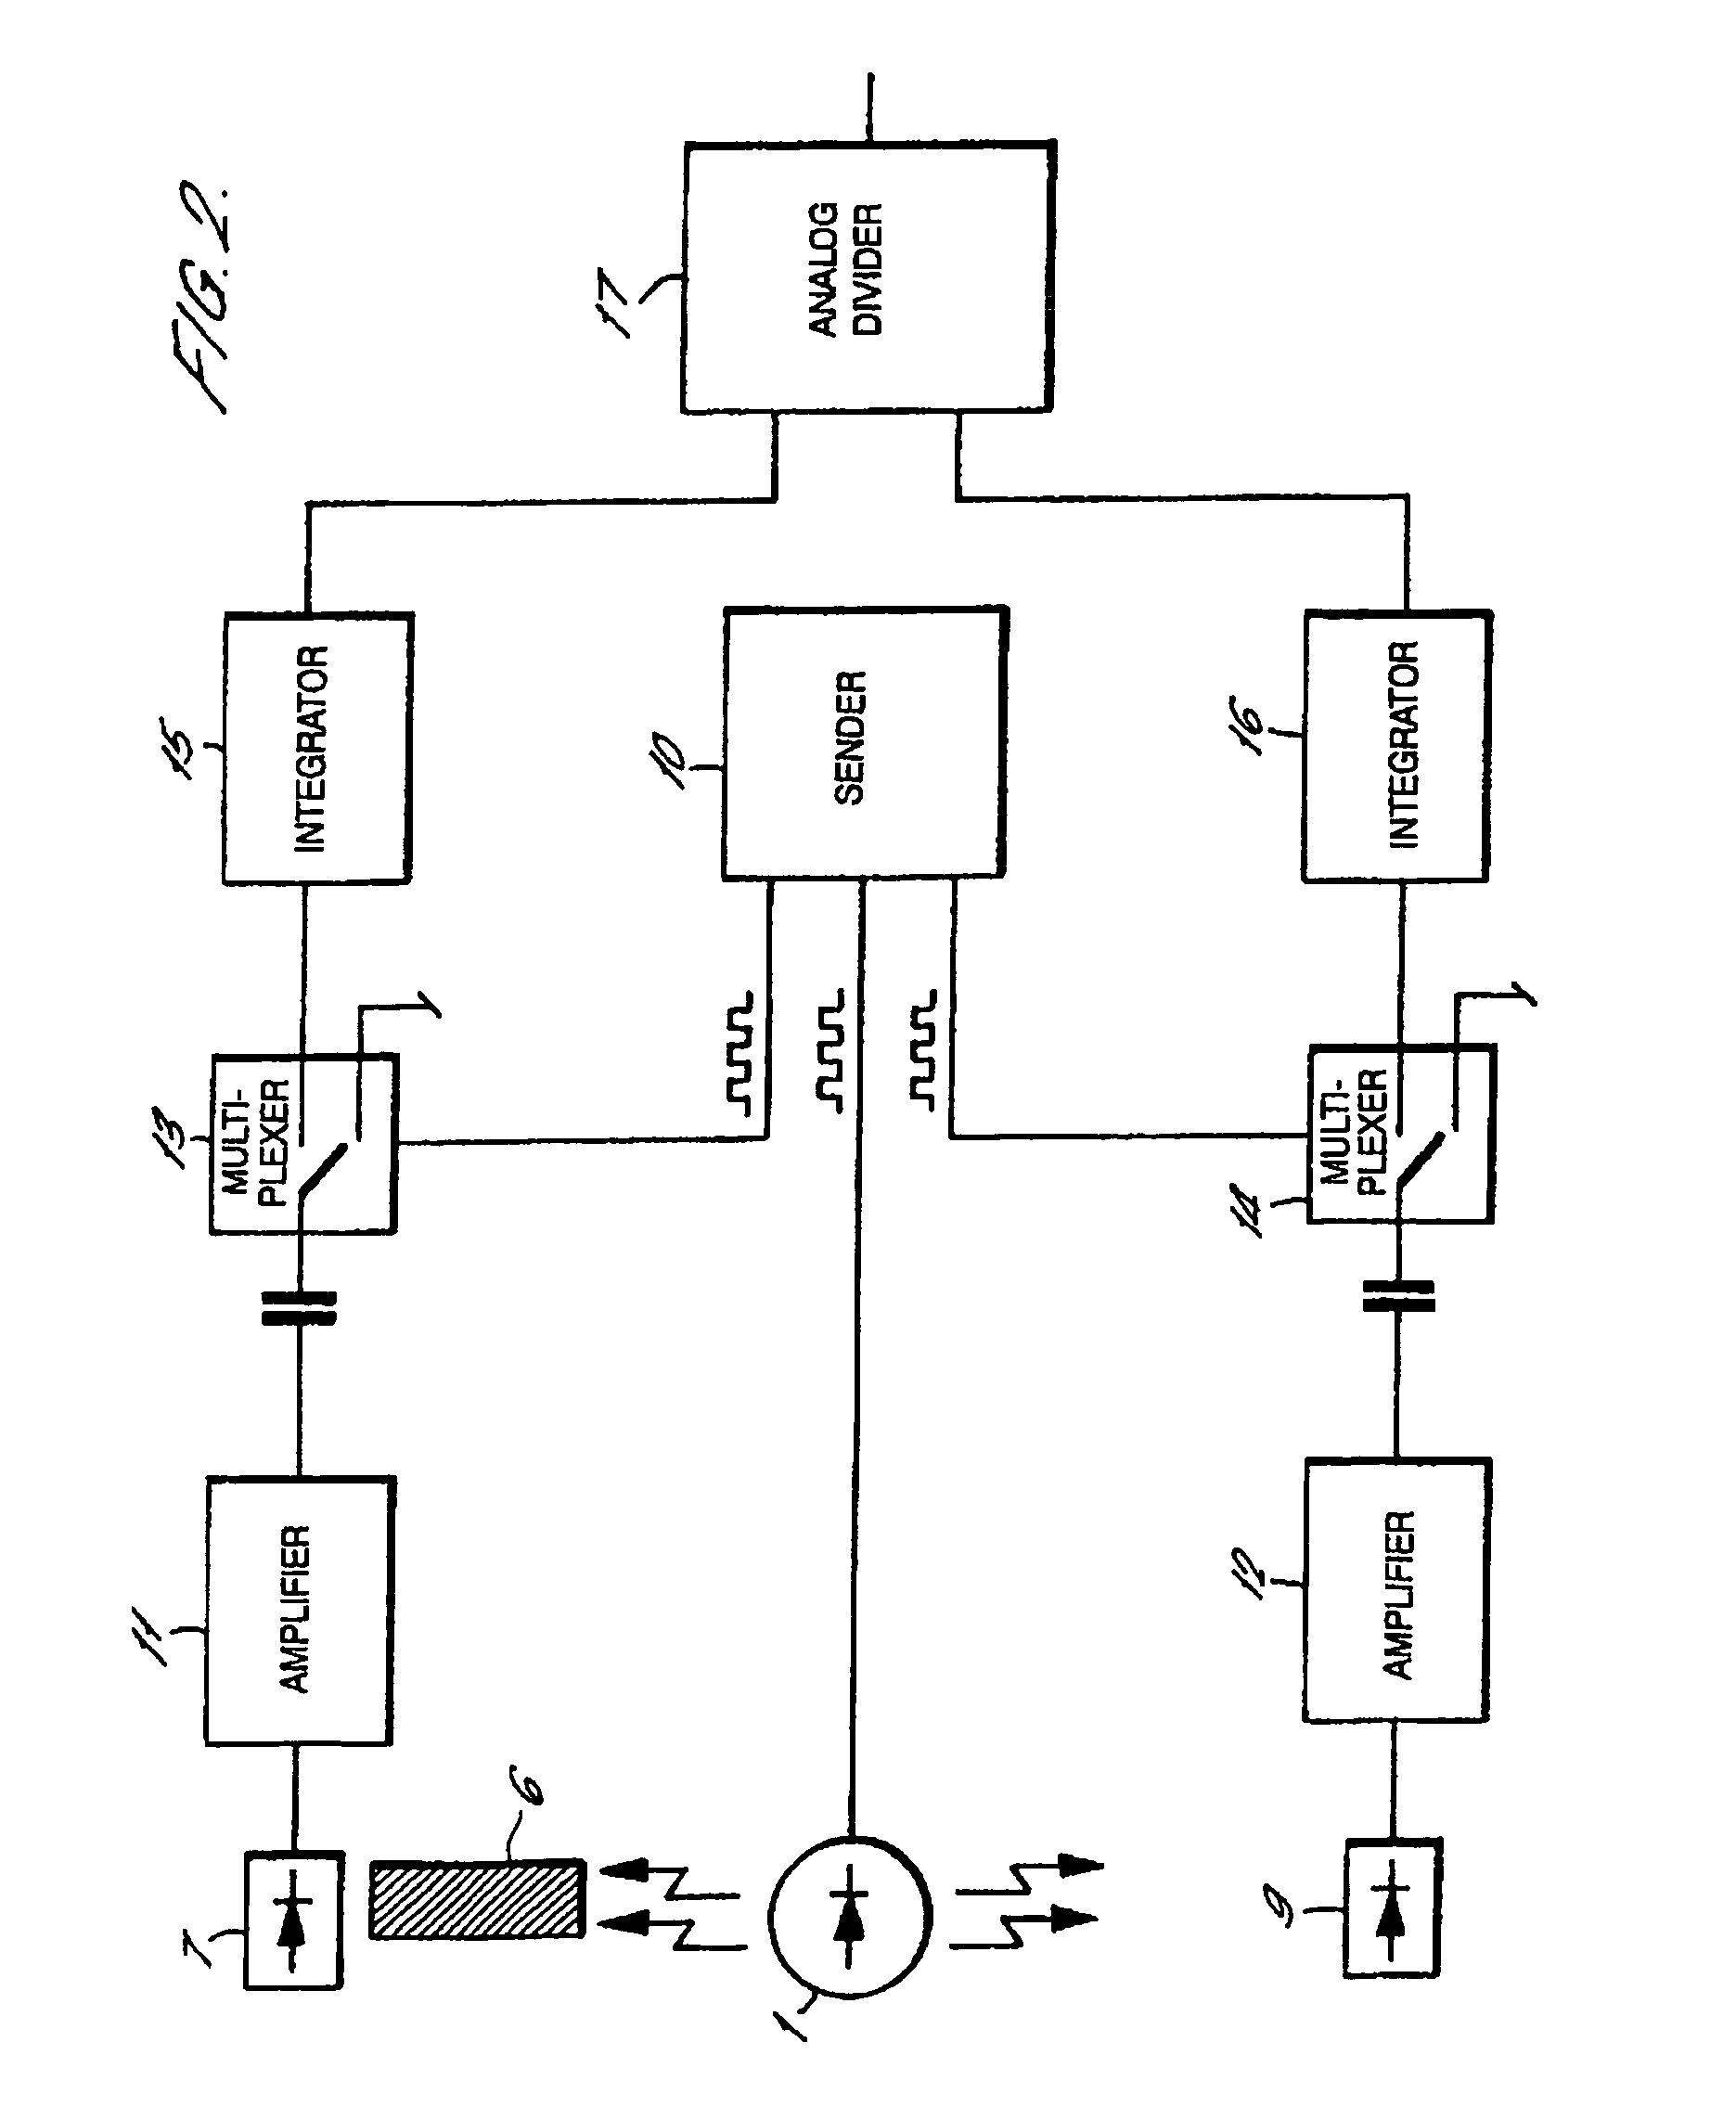 Optical sensor containing particles for in situ measurement of analytes